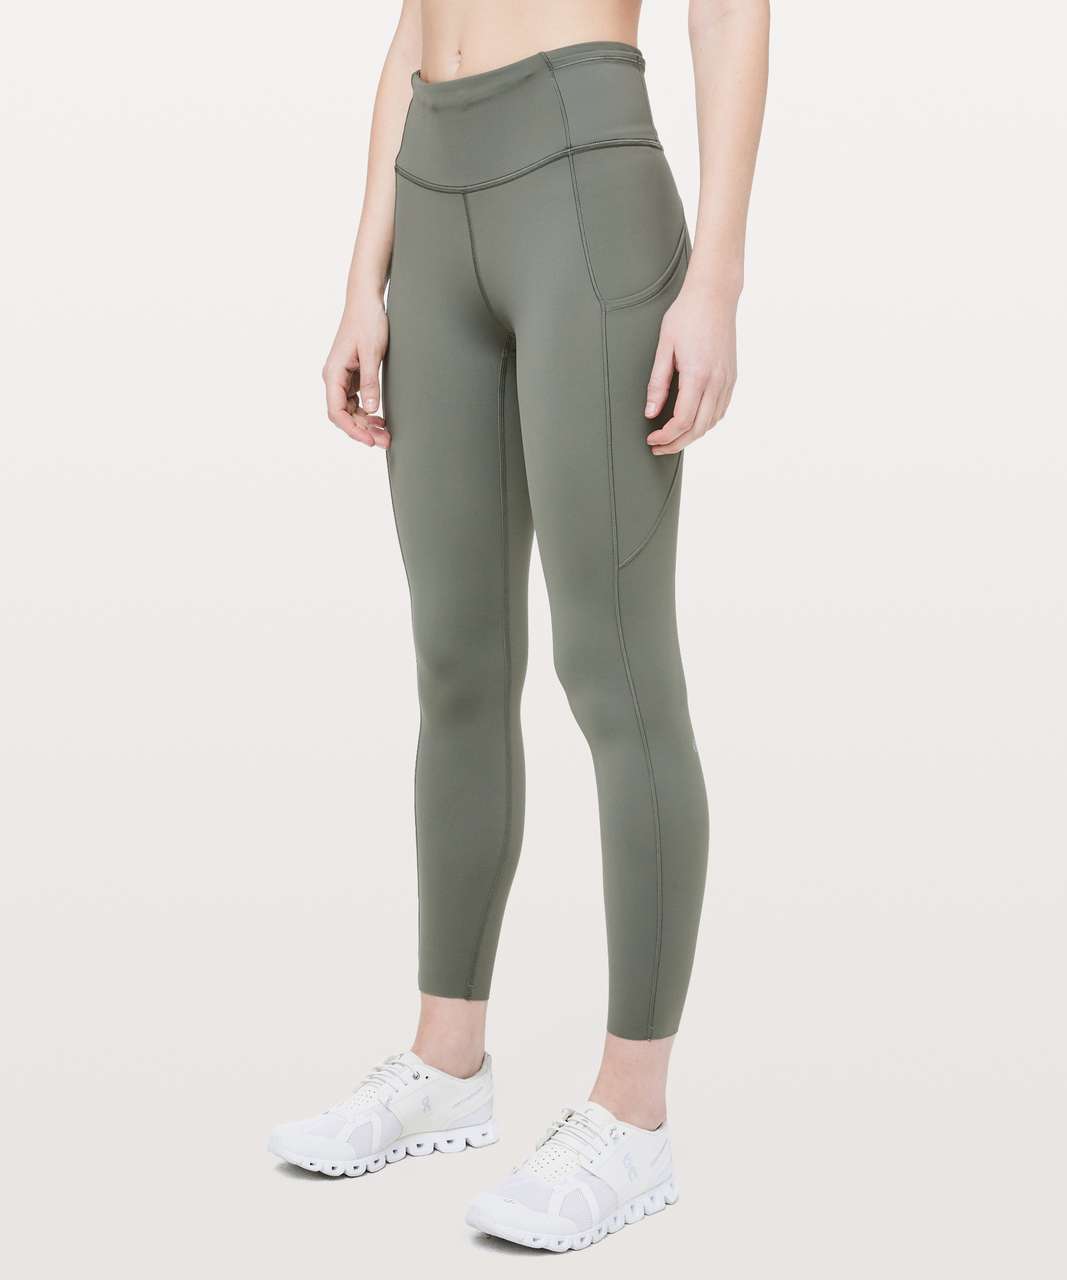 Lululemon Fast & Free 7/8 Tight II *Non-Reflective Nulux 25" - Grey Sage